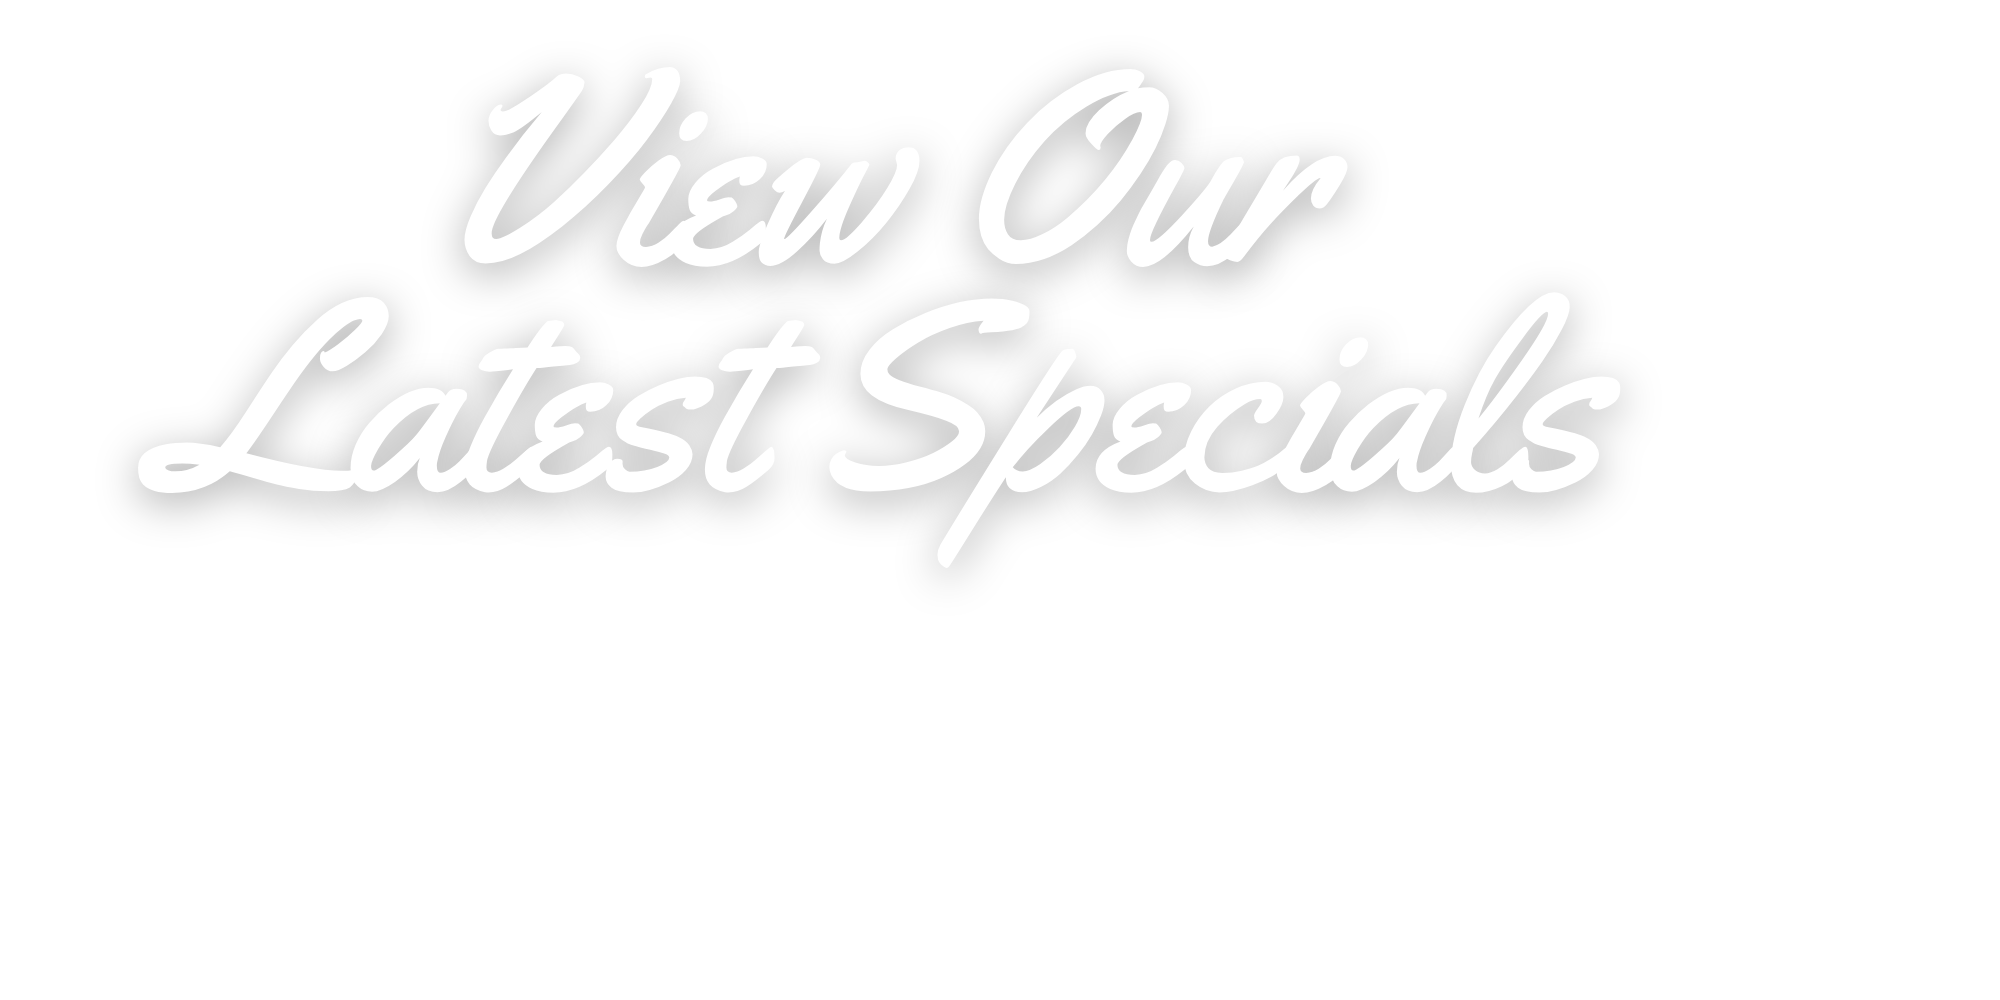 View our latest specials.